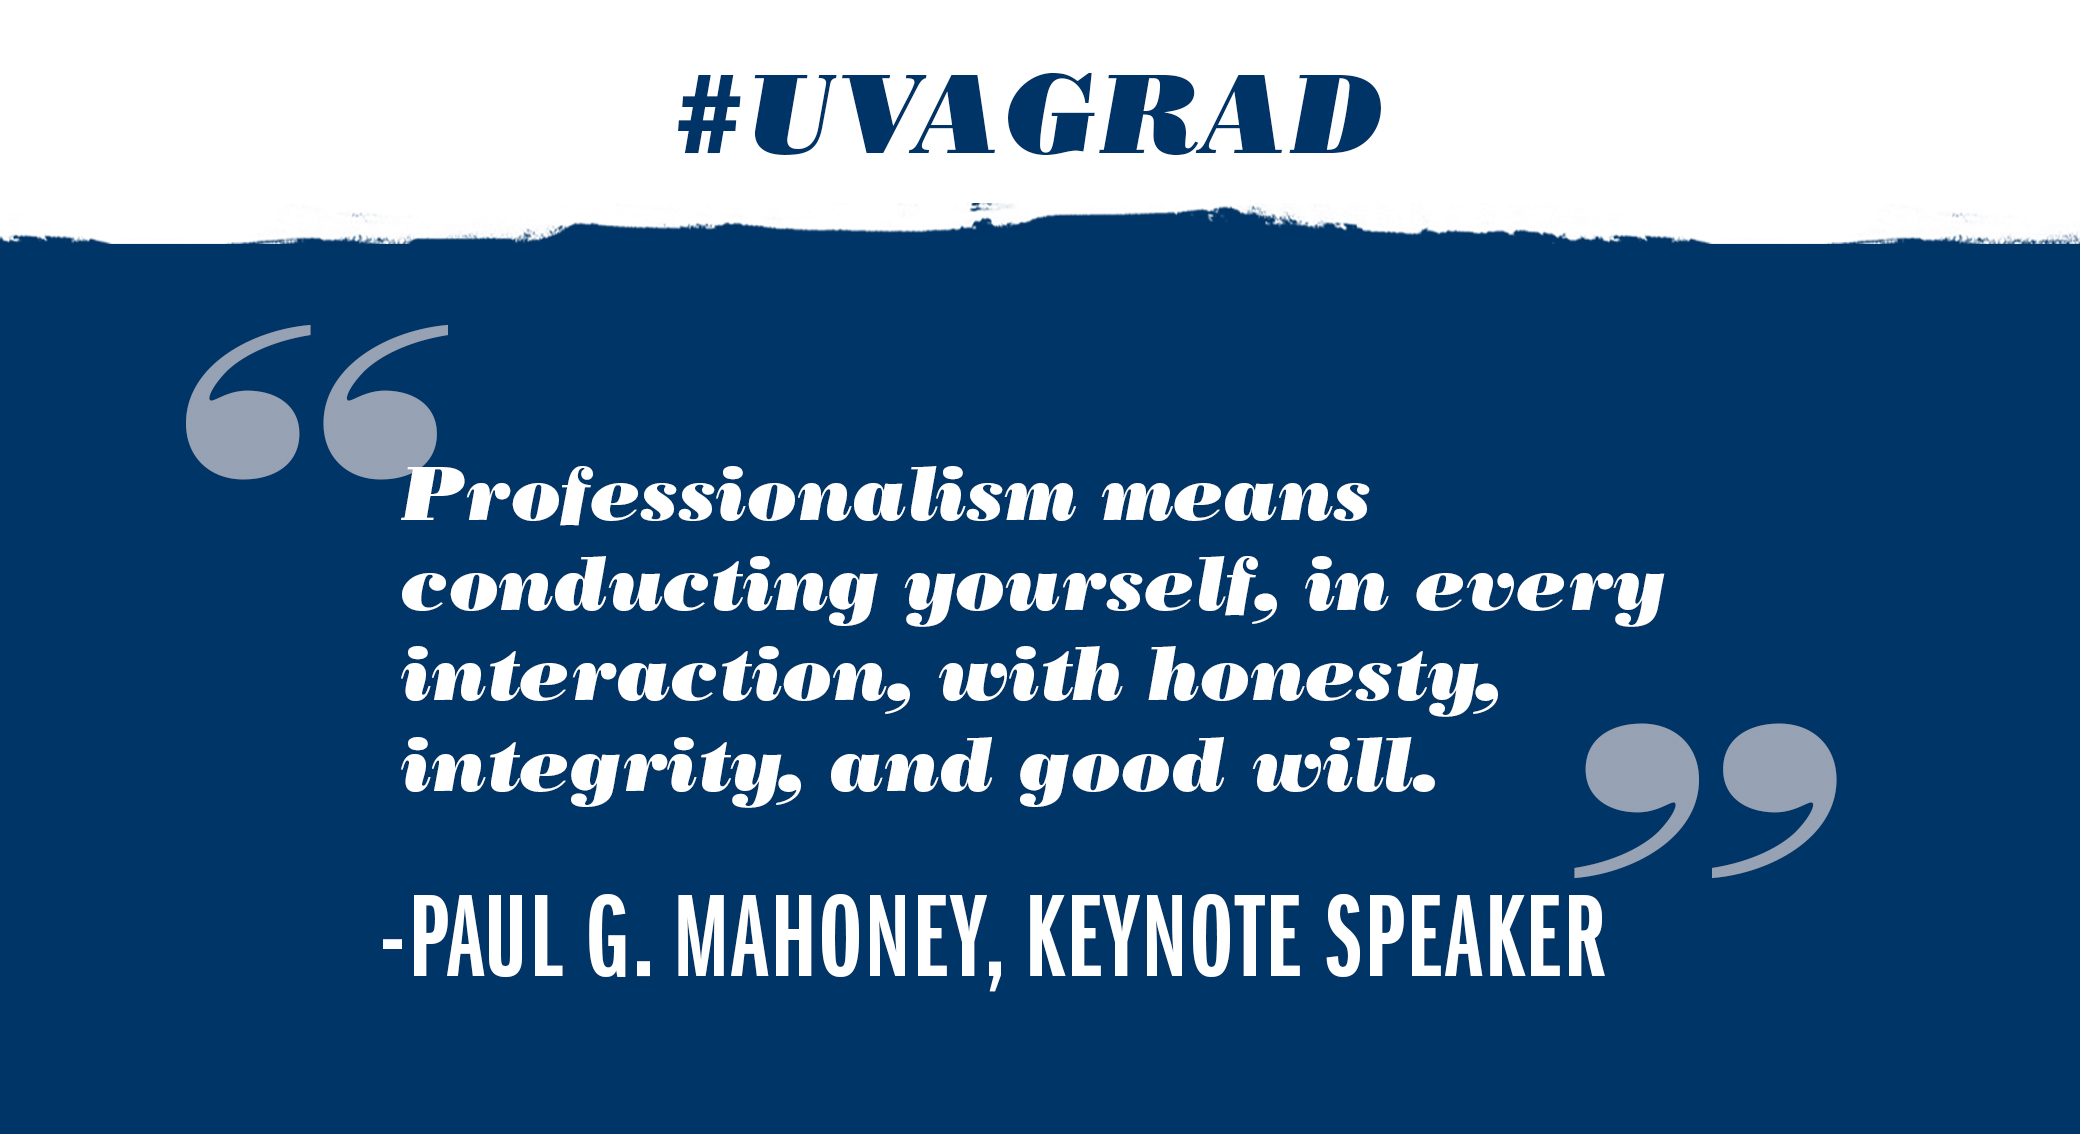 text reads: Professionalism means conducting yourself, in every interaction, with honesty, integrity, and good will. Paul G. Mahoney, Keynote speaker